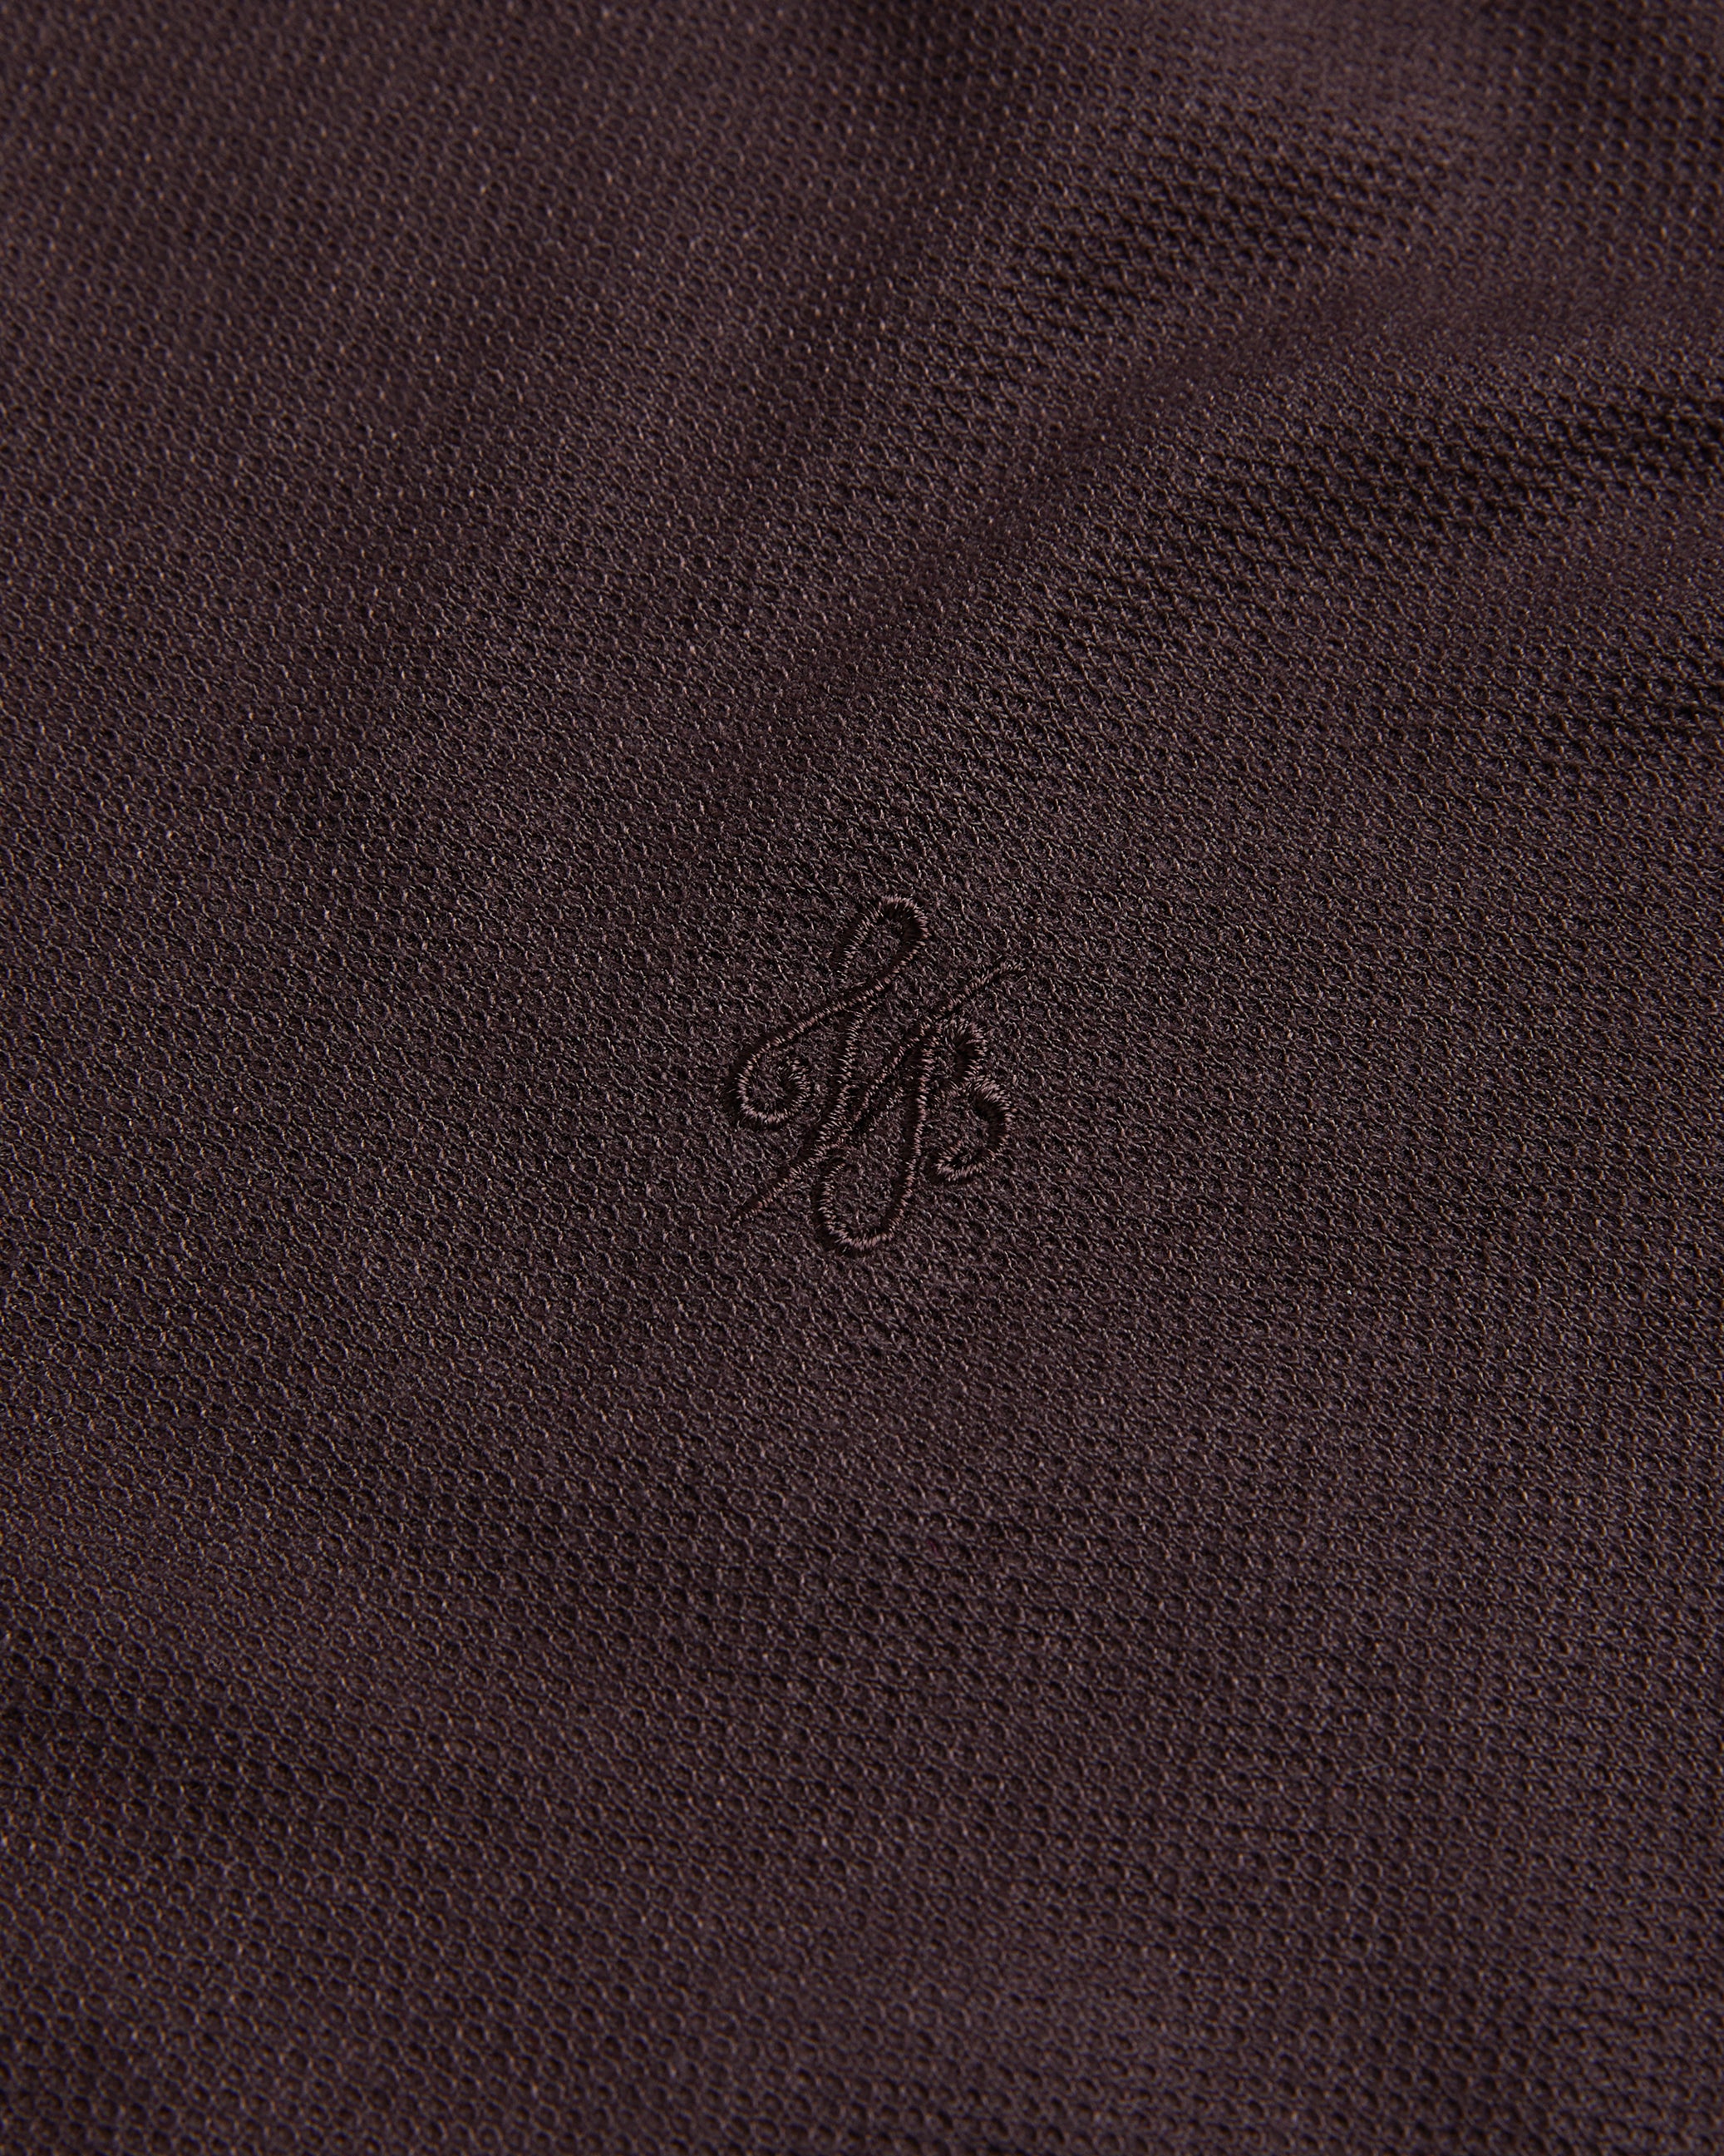 Aroue Short Sleeve Polo Shirt With Suedette Trim Brn-Choc